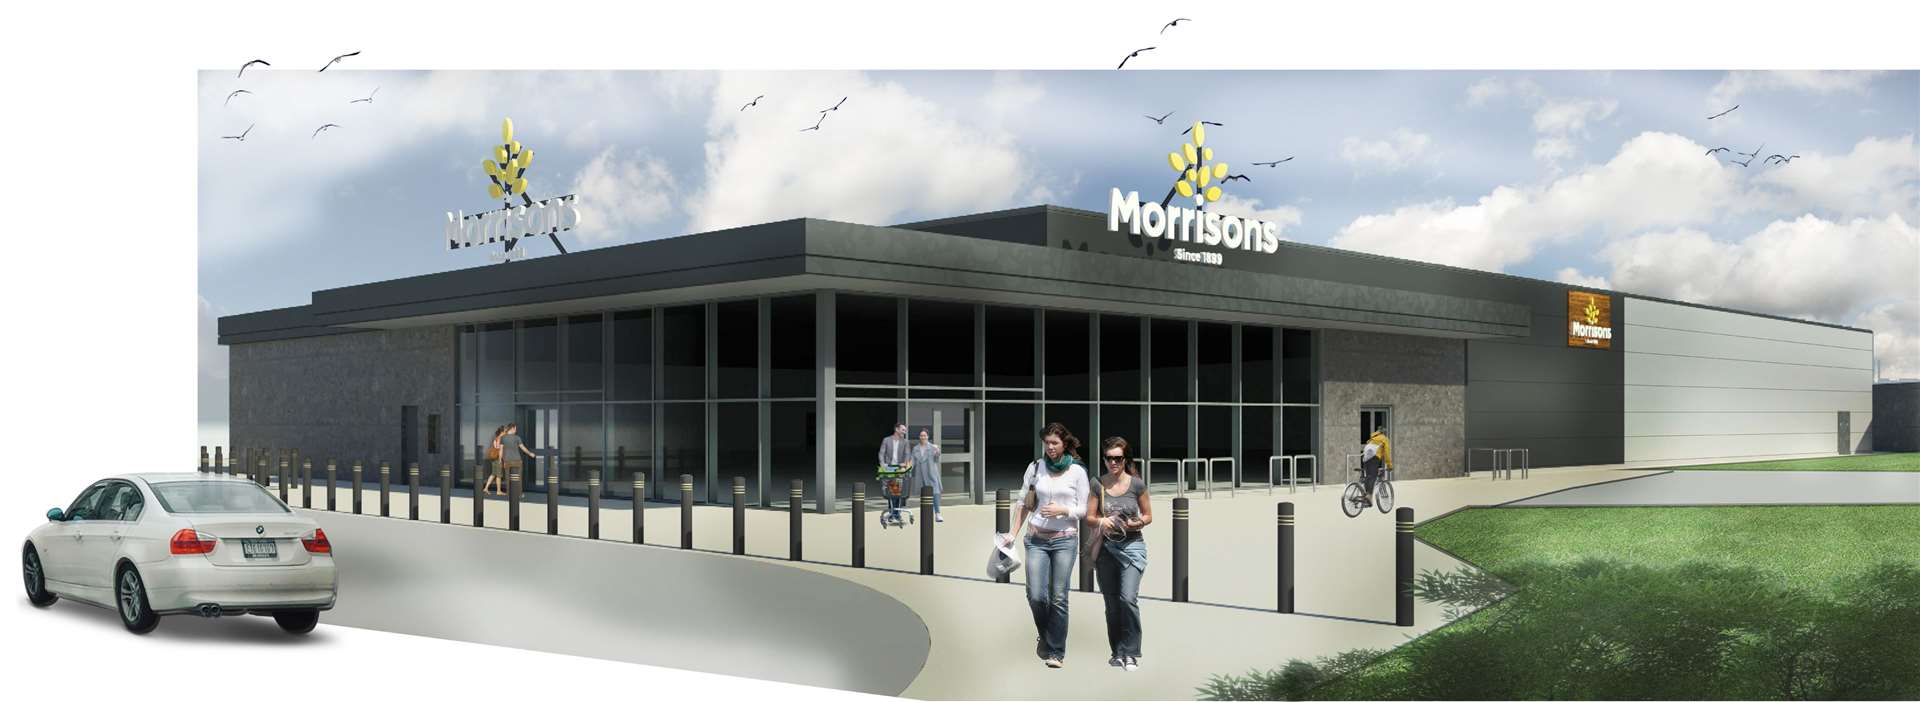 Morrisons proposed store in Banff will look something like this.